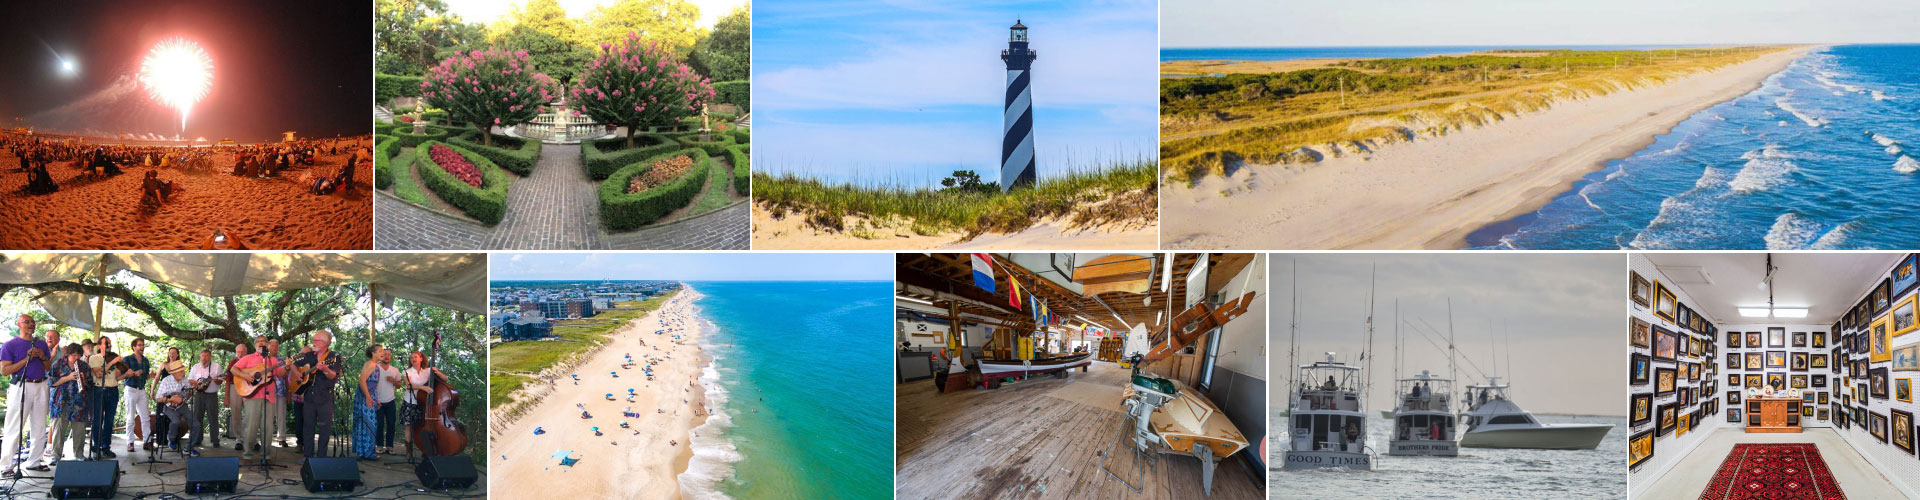 Arts and Culture: Hidden Gems for Seniors to Explore on the Outer Banks